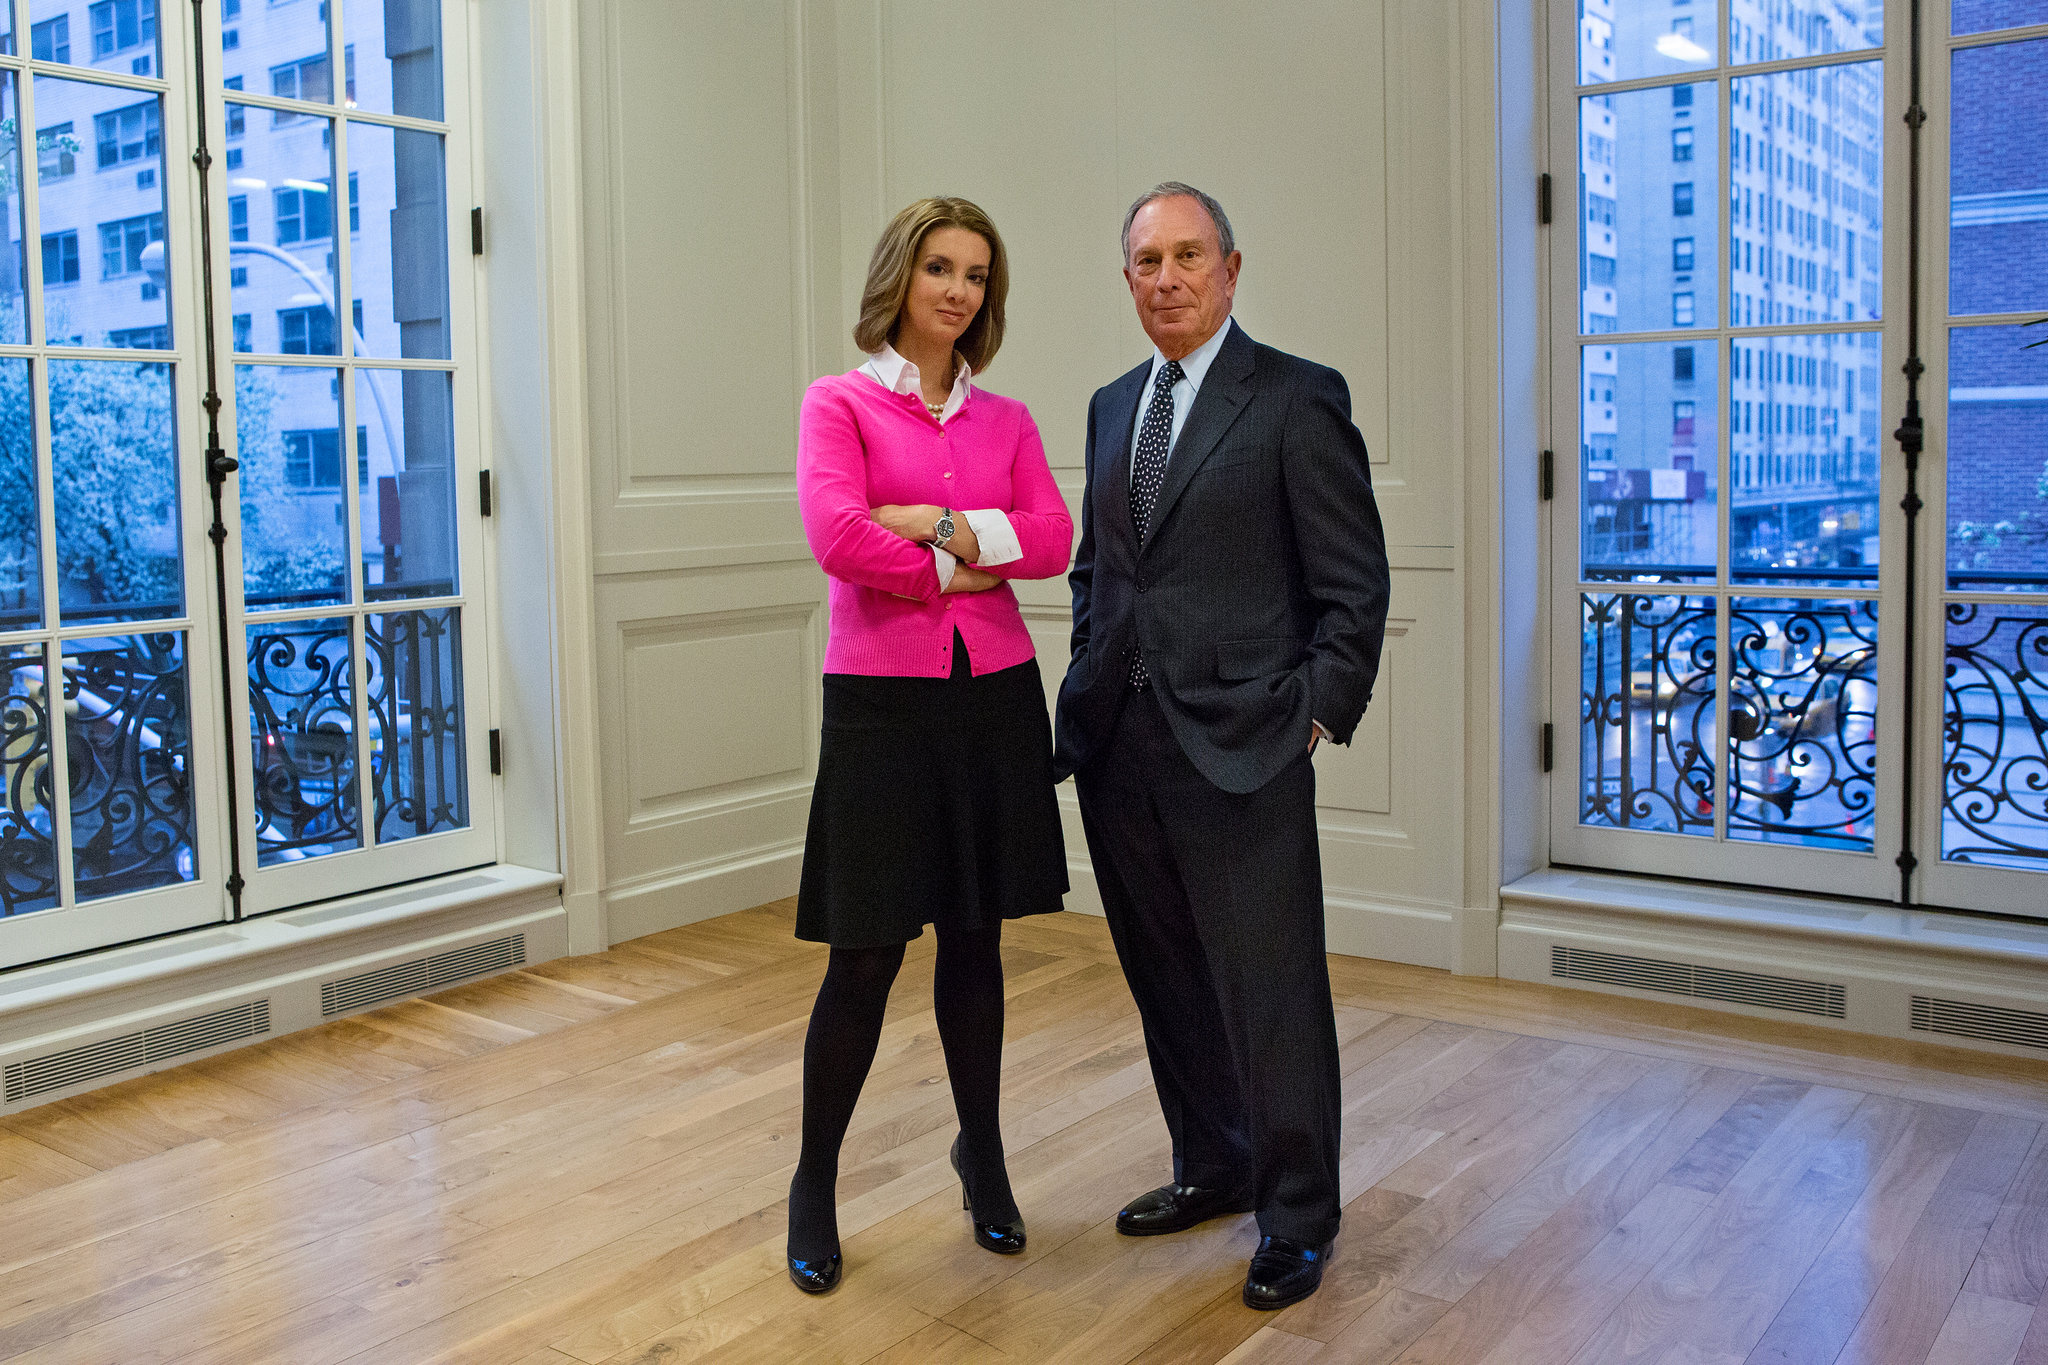 shannon-watts-with-micheal-bloomberg-nyt.jpg